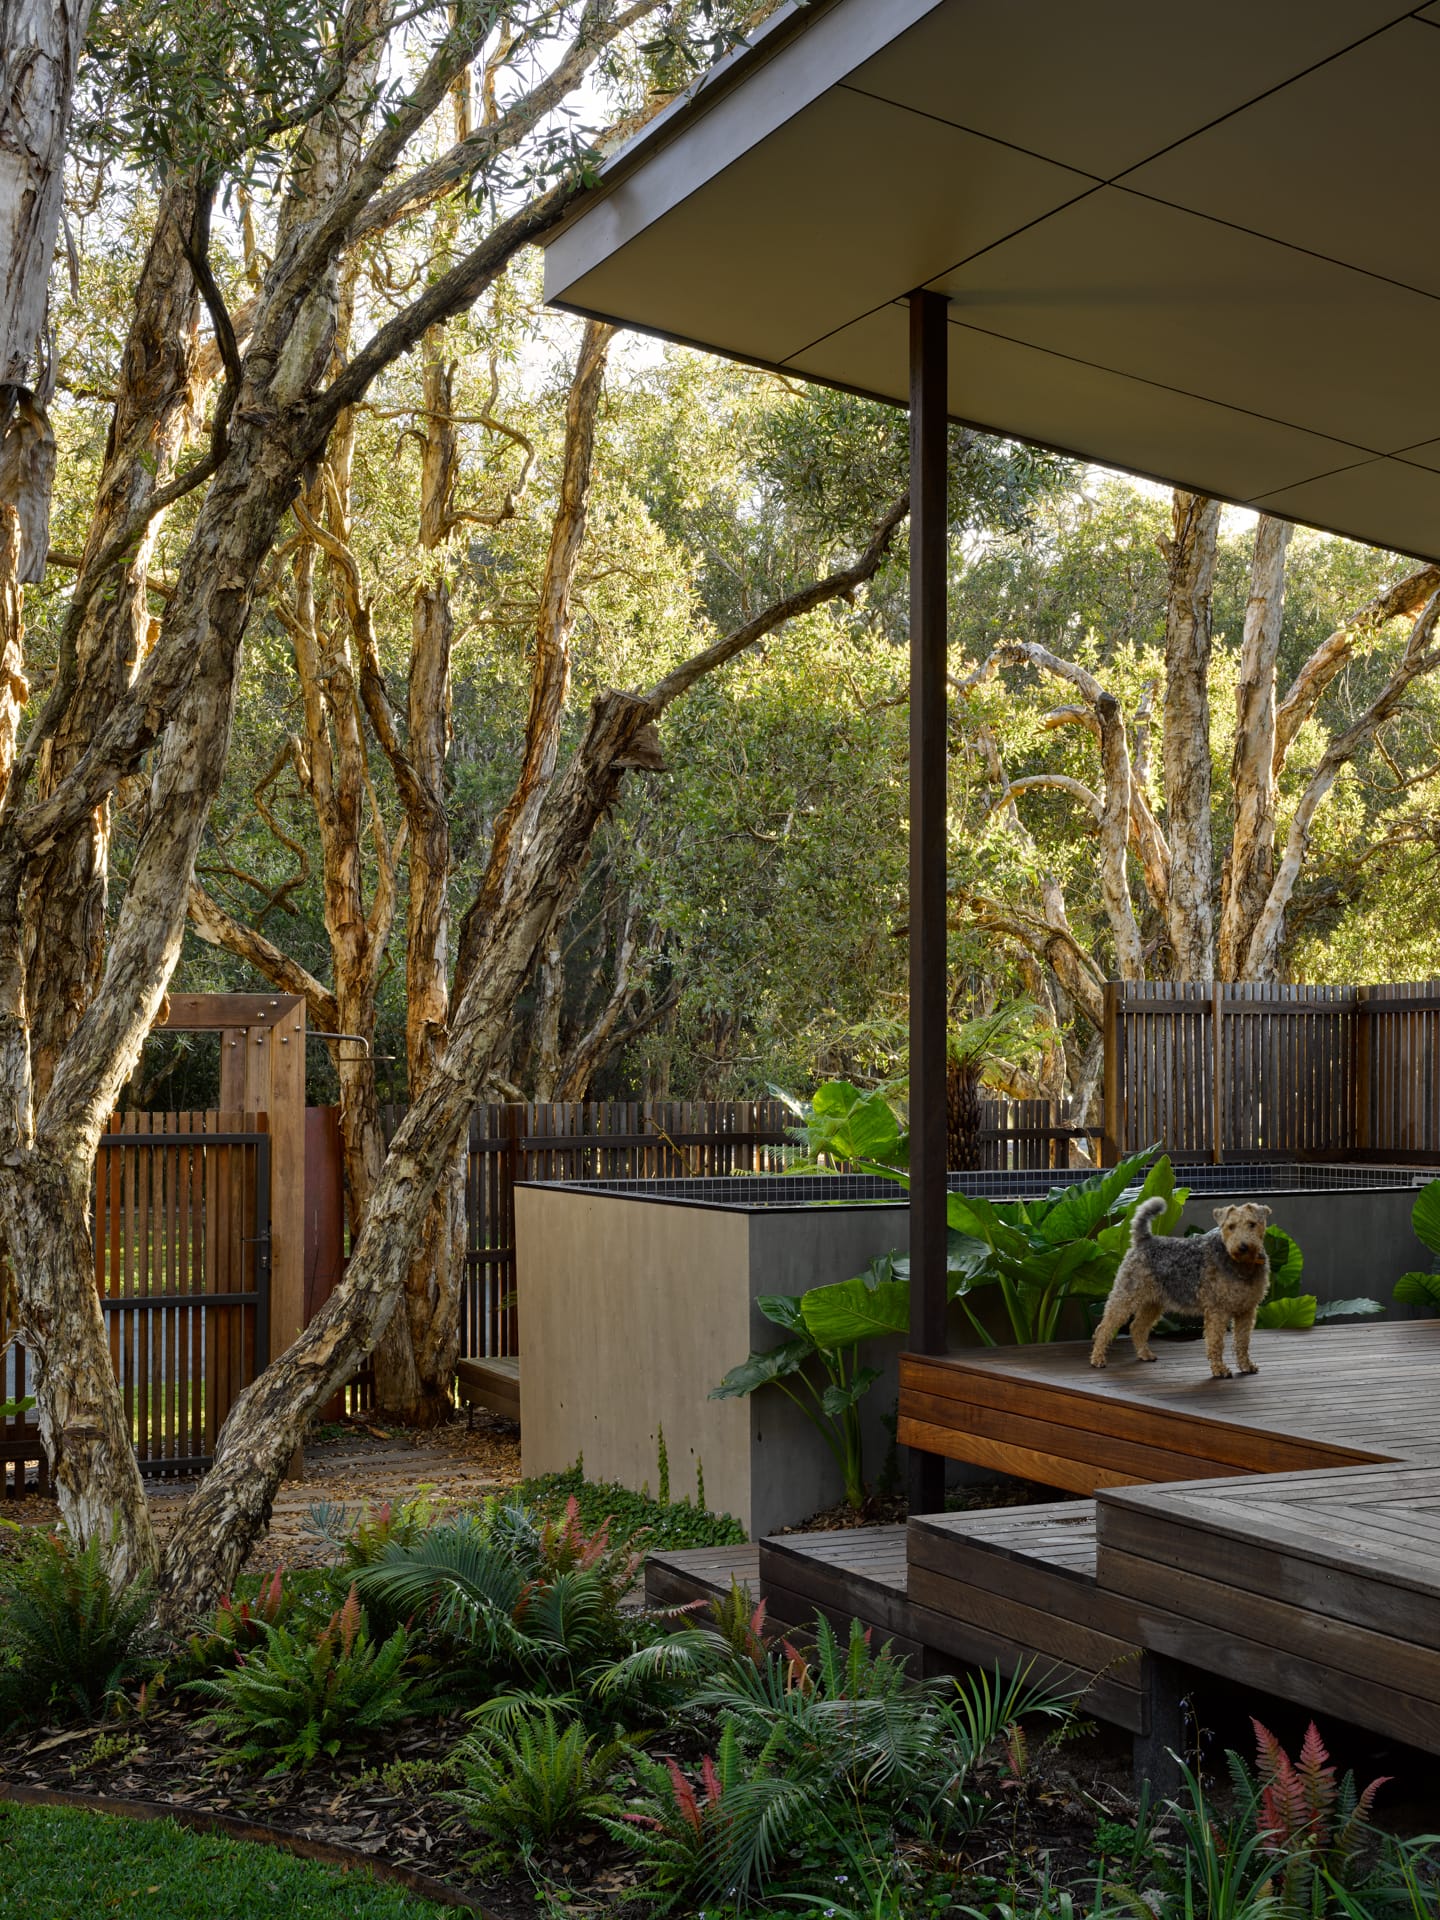 PaperBark Pod by Bark Design. Photography by Christopher Frederick Jones. Timber deck and elevated tiled plunge pool. Tall timbe paneled fence in background. Lots of green plants. 